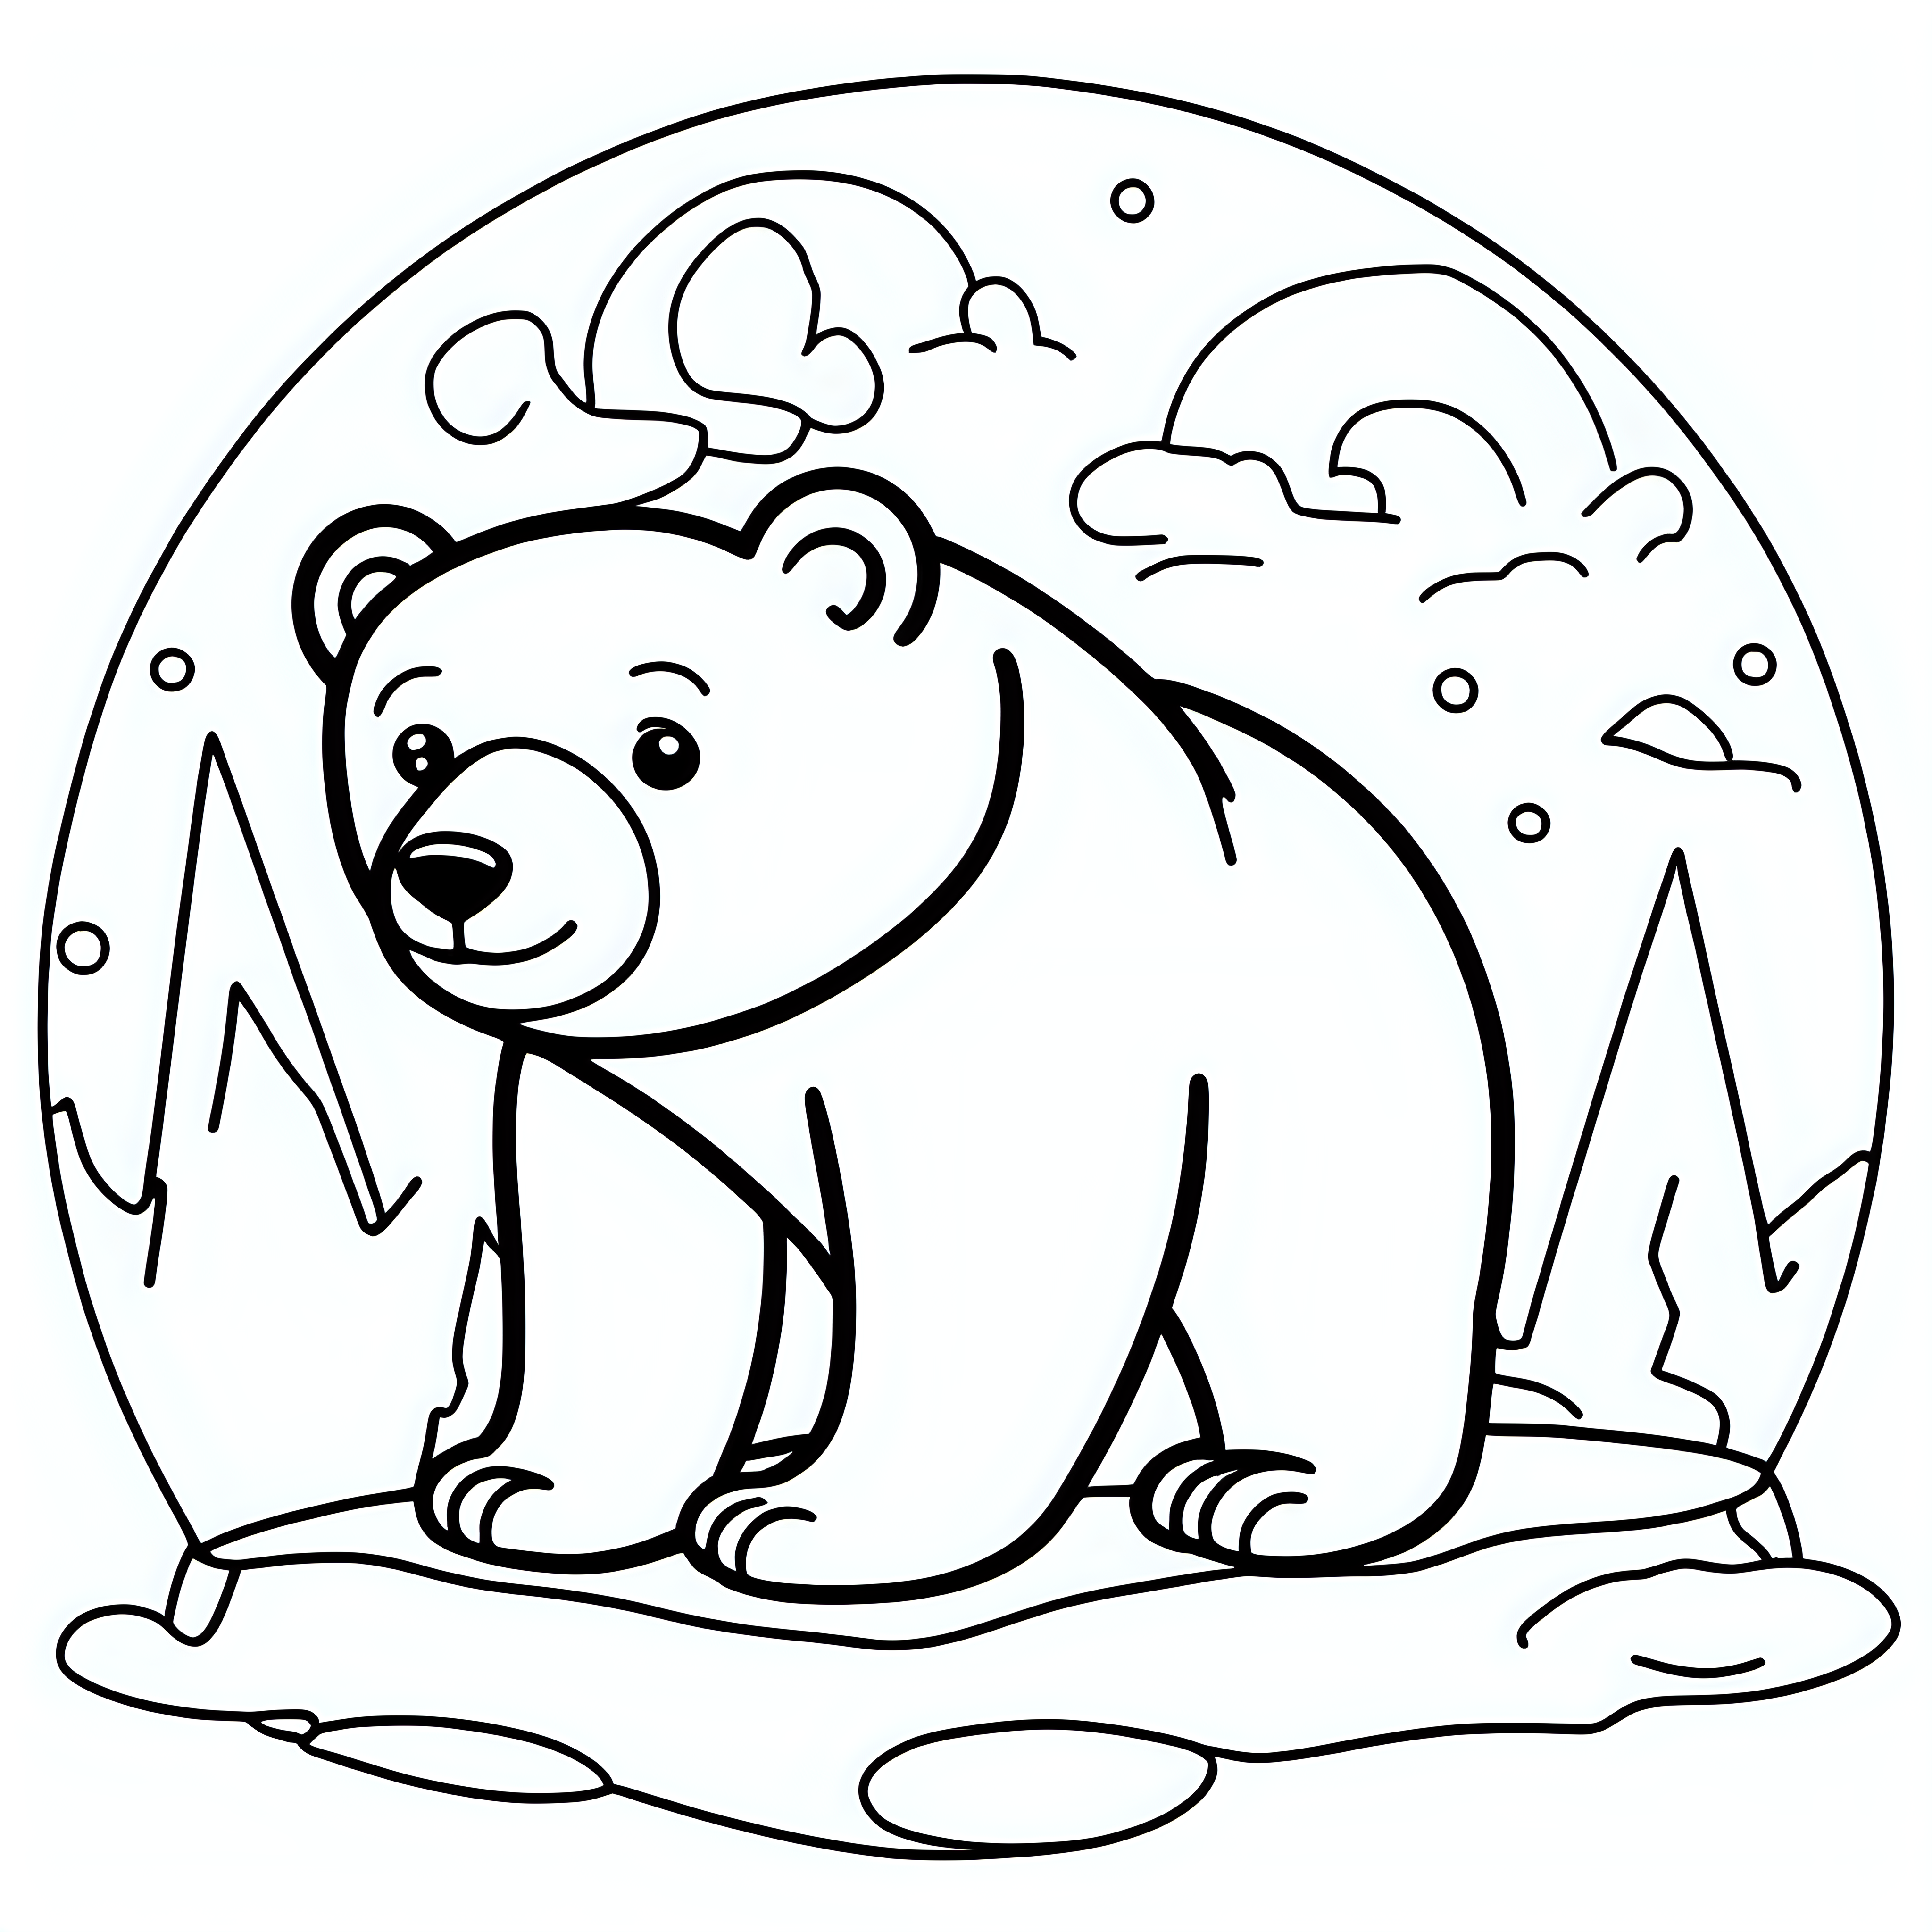 draw a cute Polar Bear with only the